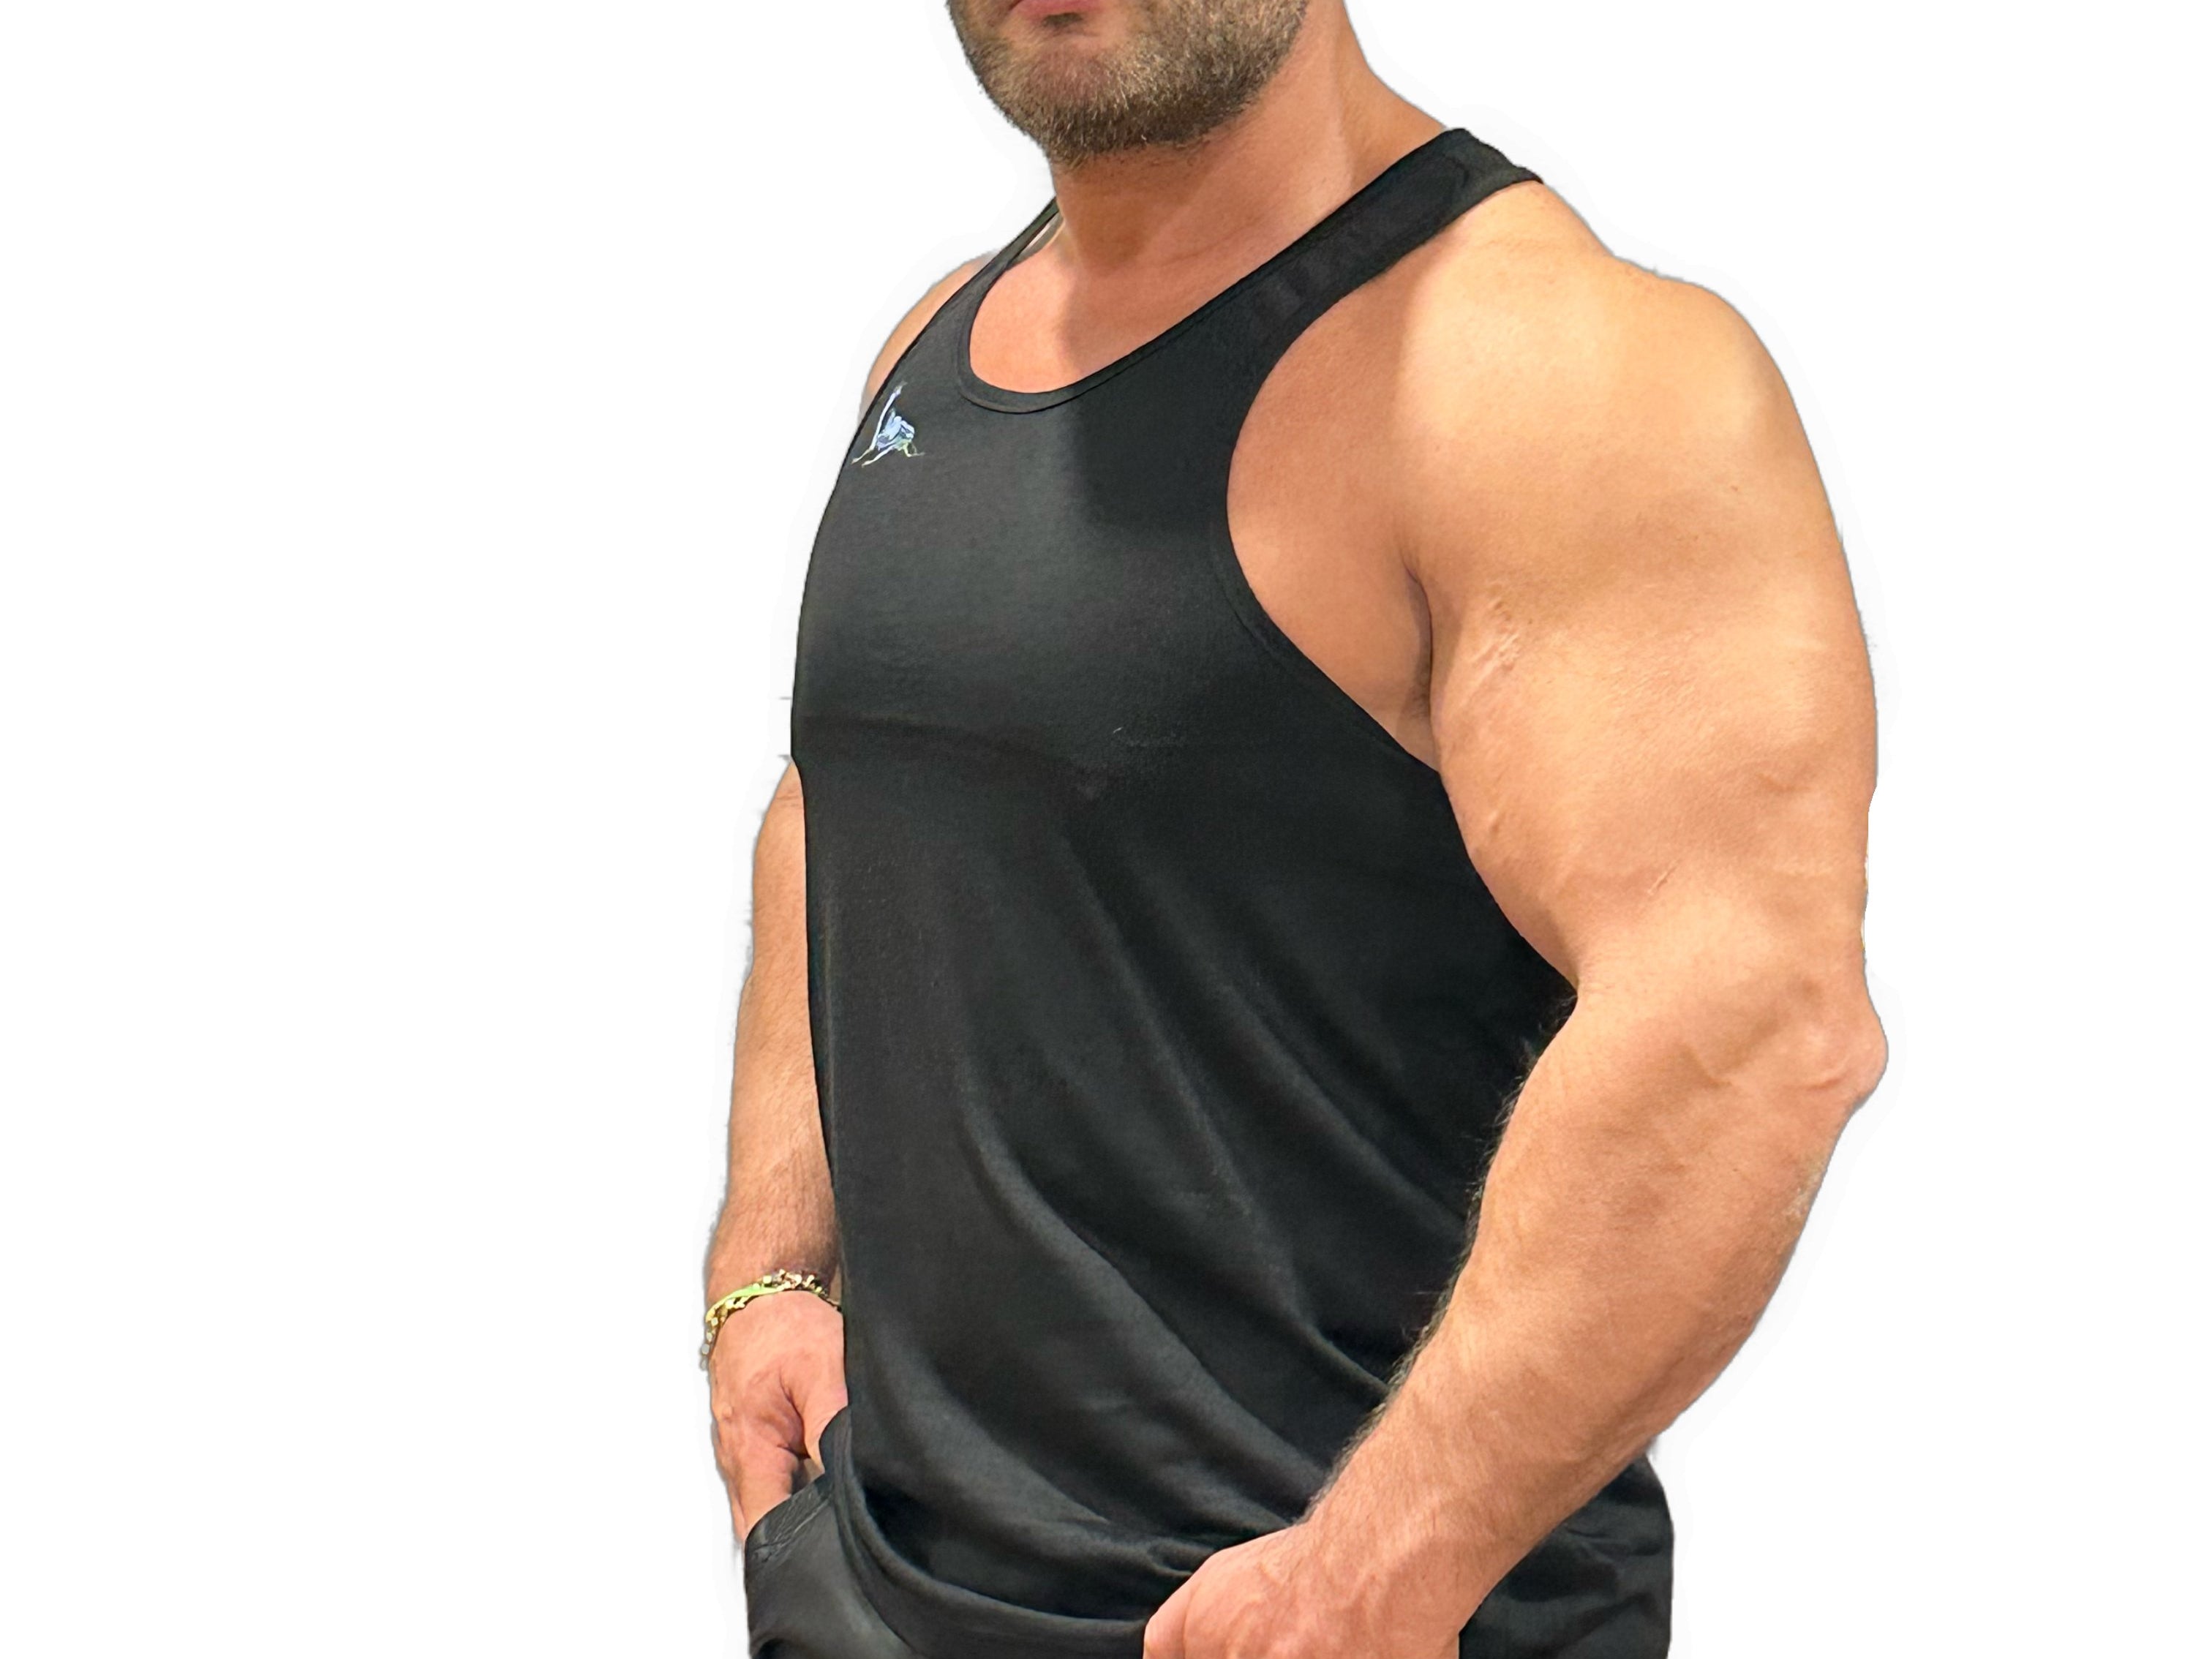 Power X - Black Tank Top for Men - Sarman Fashion - Wholesale Clothing Fashion Brand for Men from Canada